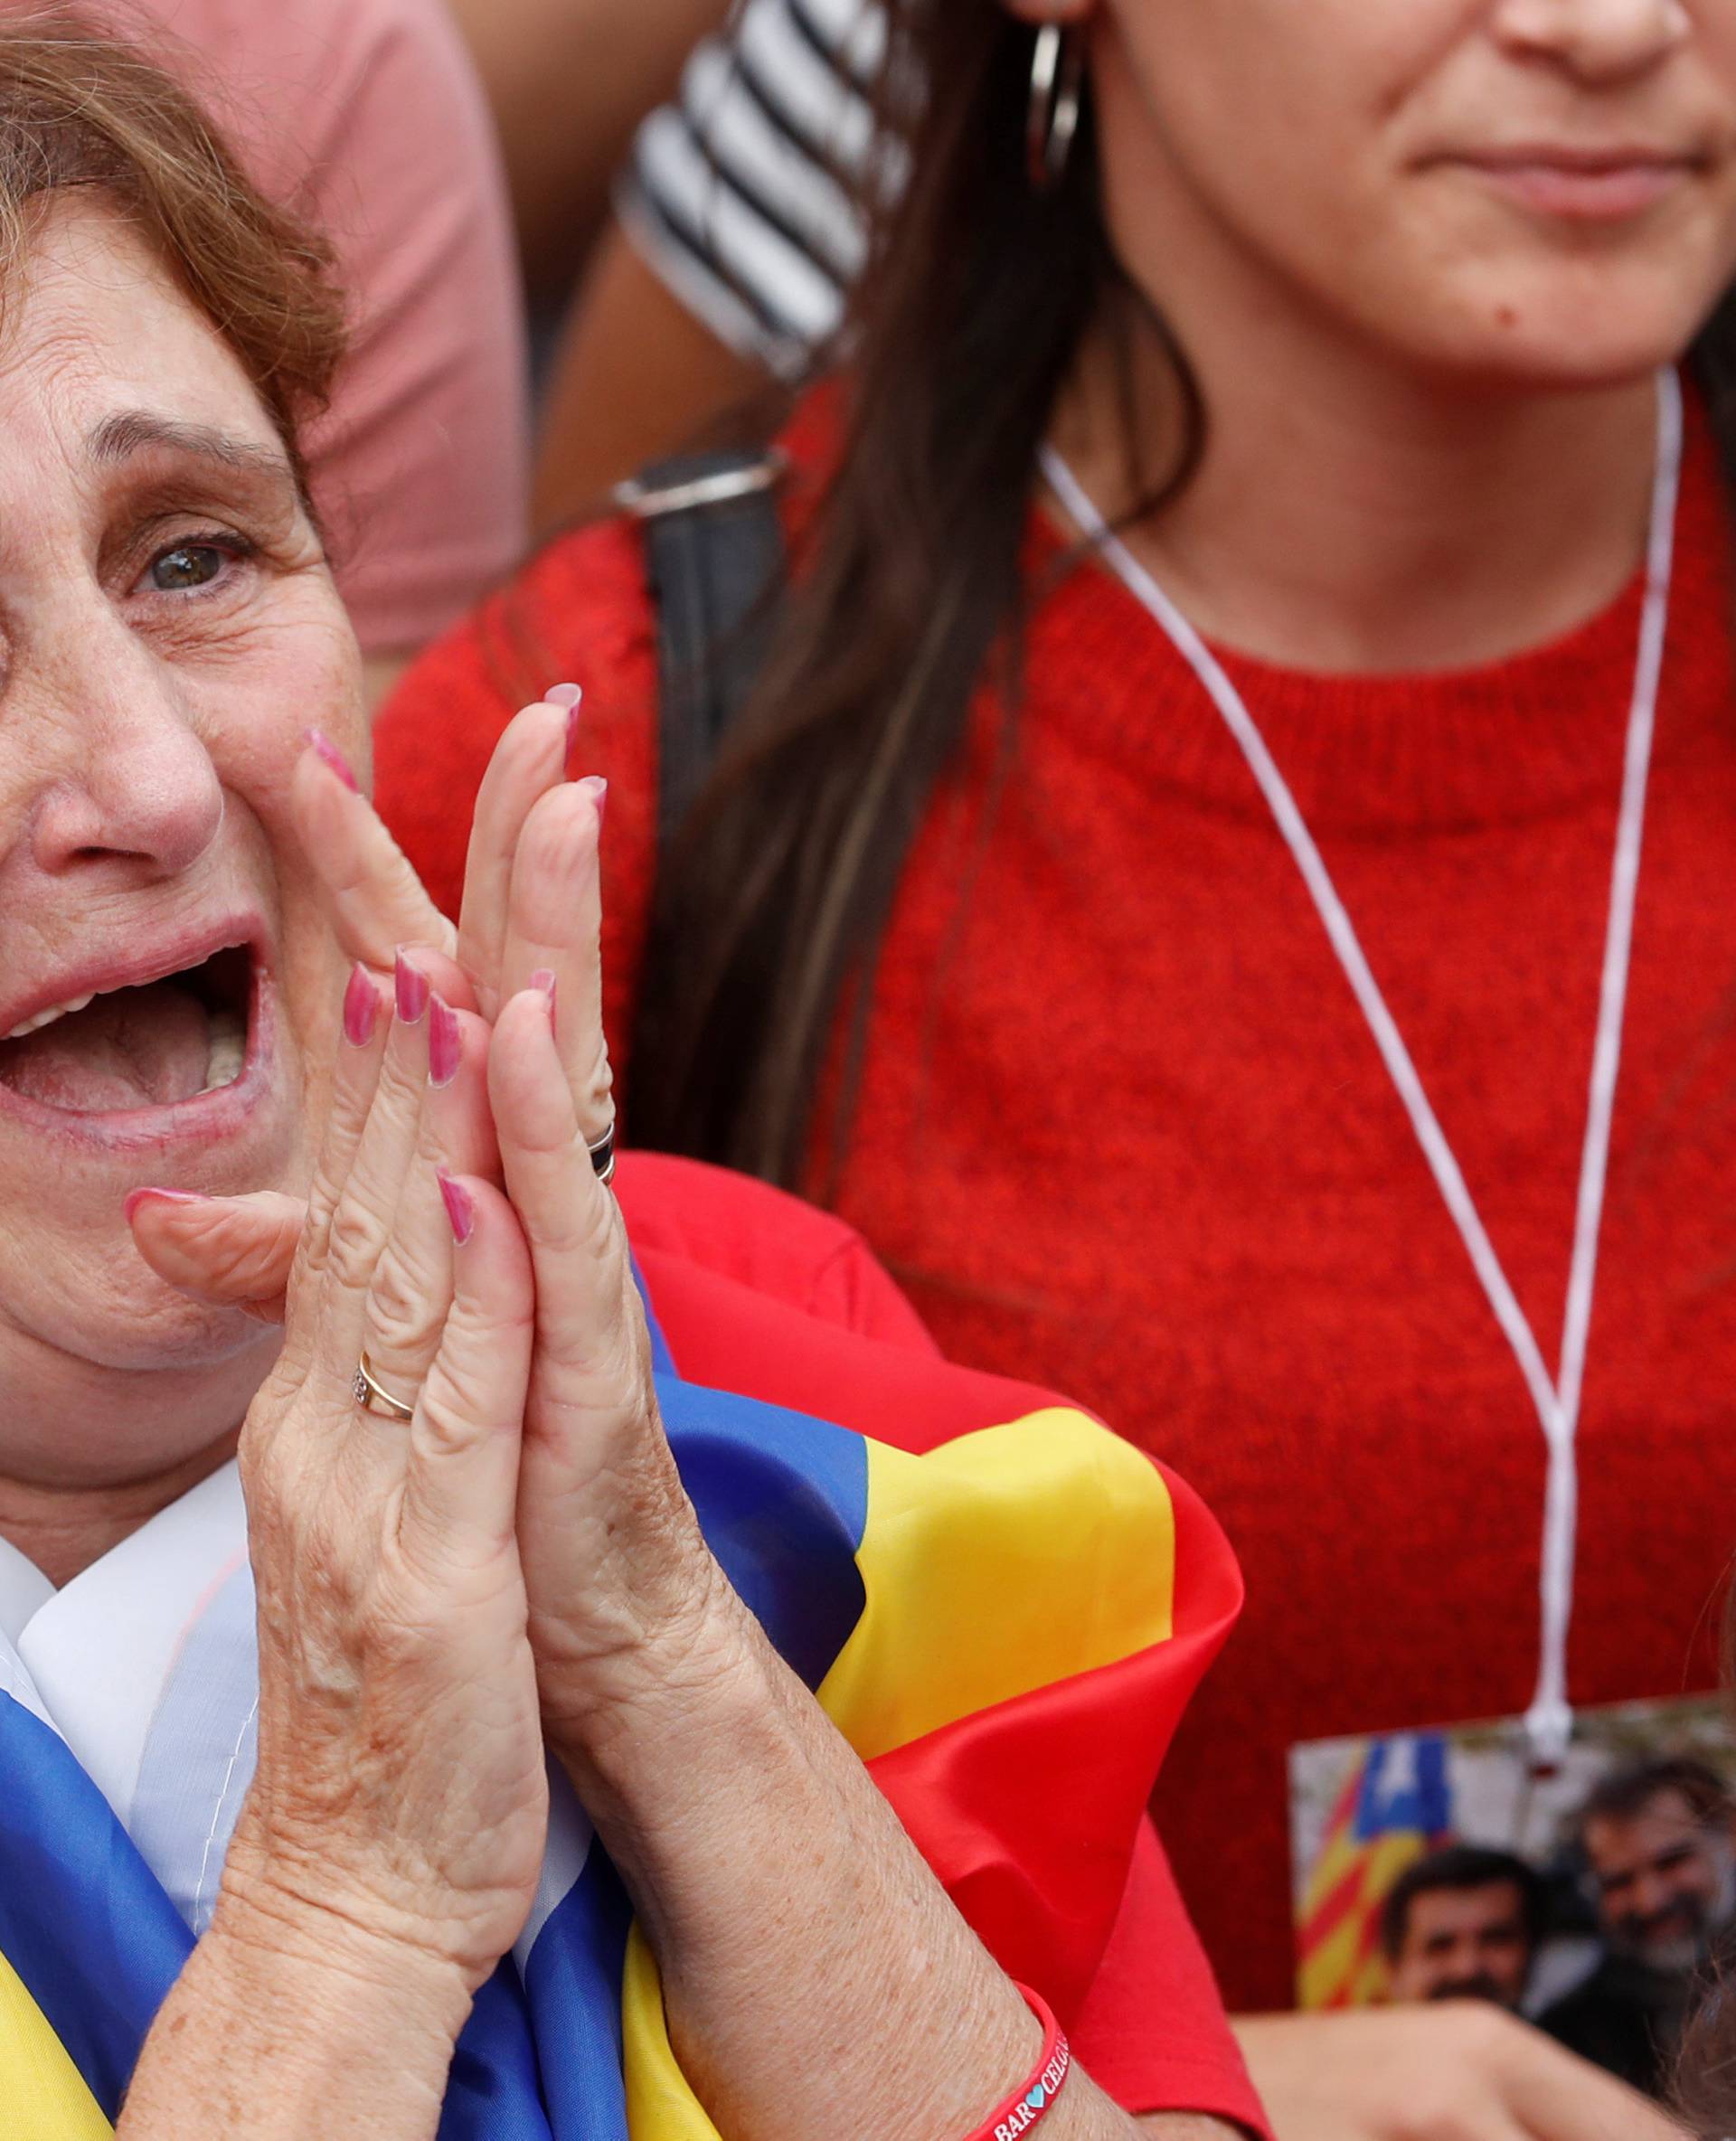 Woman reacts while the Catalan regional parliament votes for independence of Catalonia from Spain in Barcelona